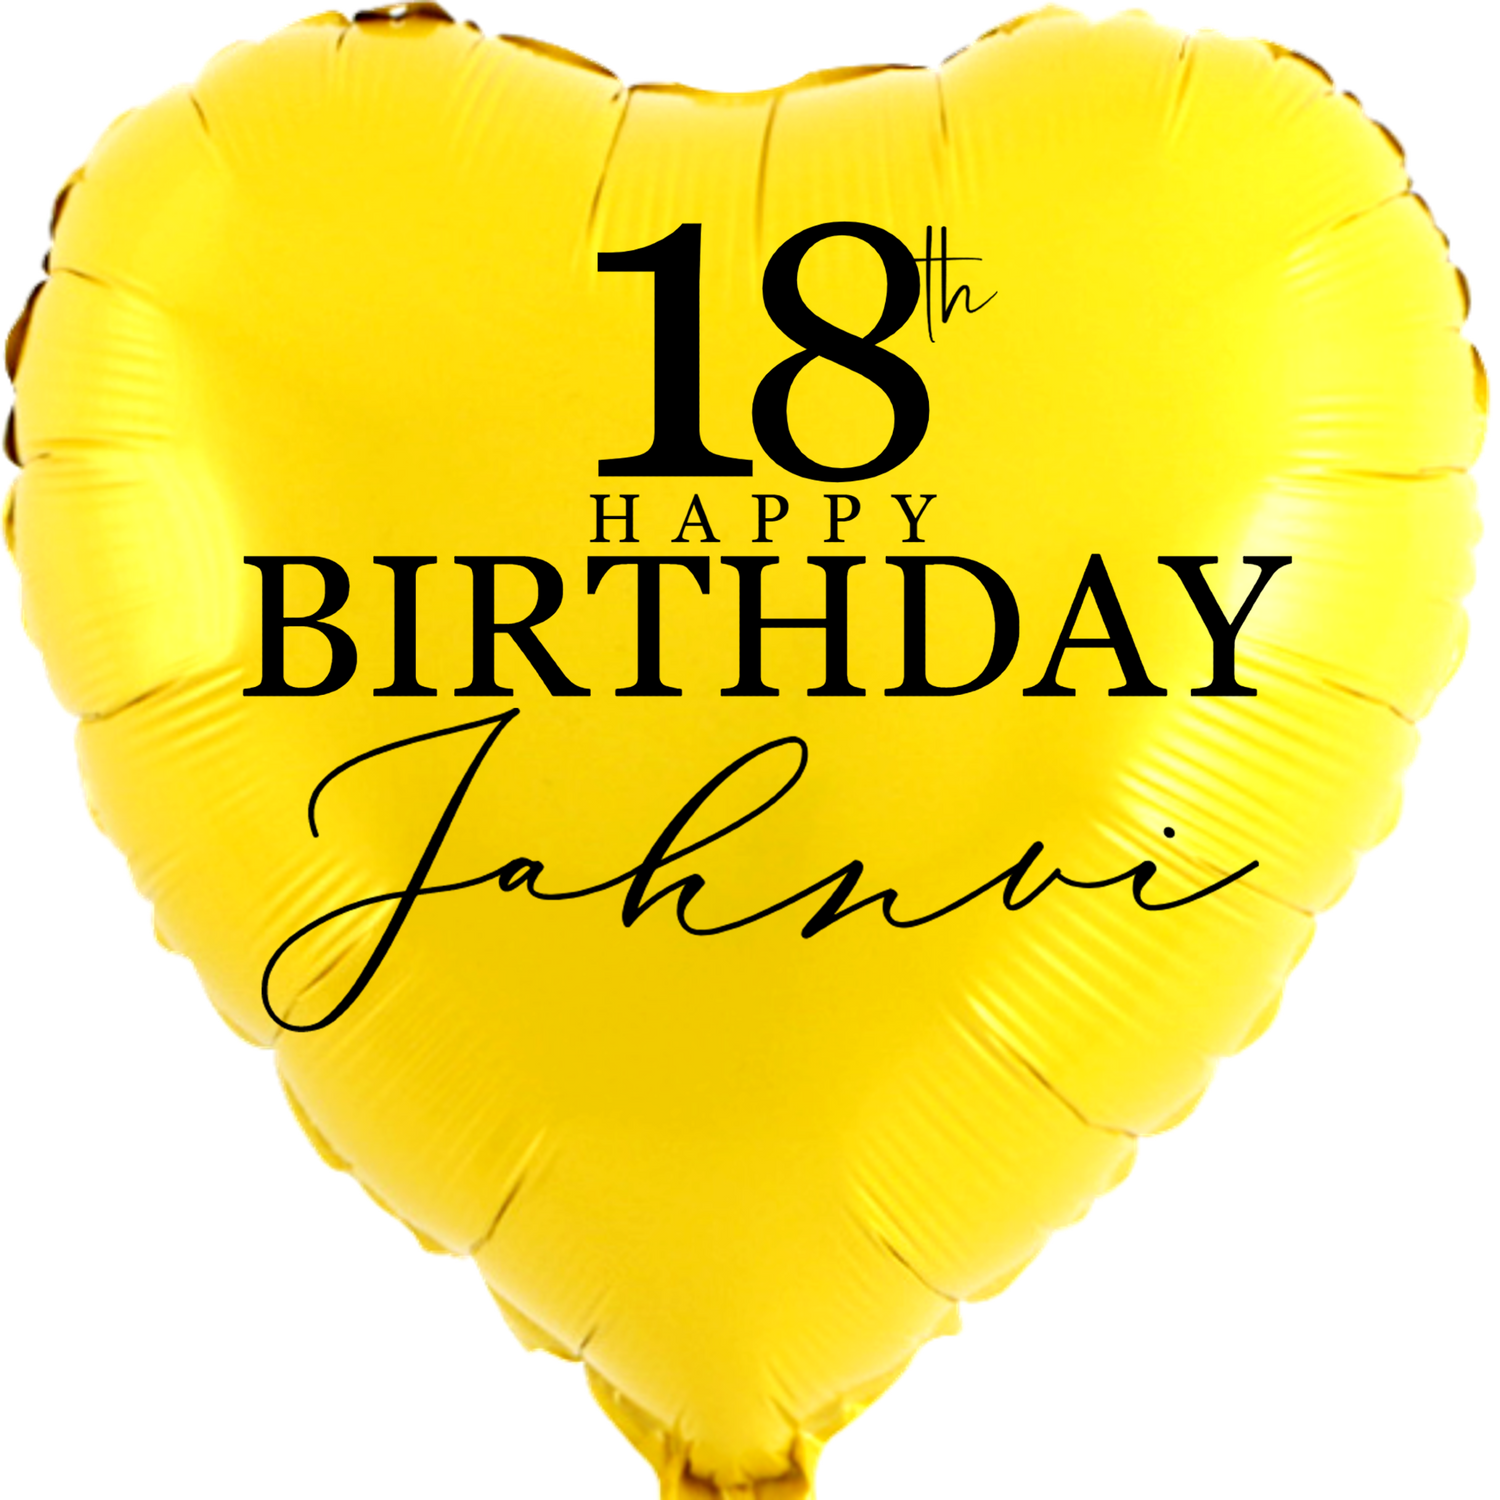 Personalized/Customized Custom Name/Text & Age Golden Heart Foil/Mylar Balloons For Six Months/First/Second/Third/Sixteenth/Twenty-First/Thirty/Forty/Fifty/Sixty/Seventieth Birthday, Milestone Birthday or a Special Themed Birthday Event. Supports Helium/Air, Luxury Bespoke Balloons Are a Perfect Surprise For Your Baby, Wife, Mom, Dad, Brother, Sister, Friends & Loved Ones